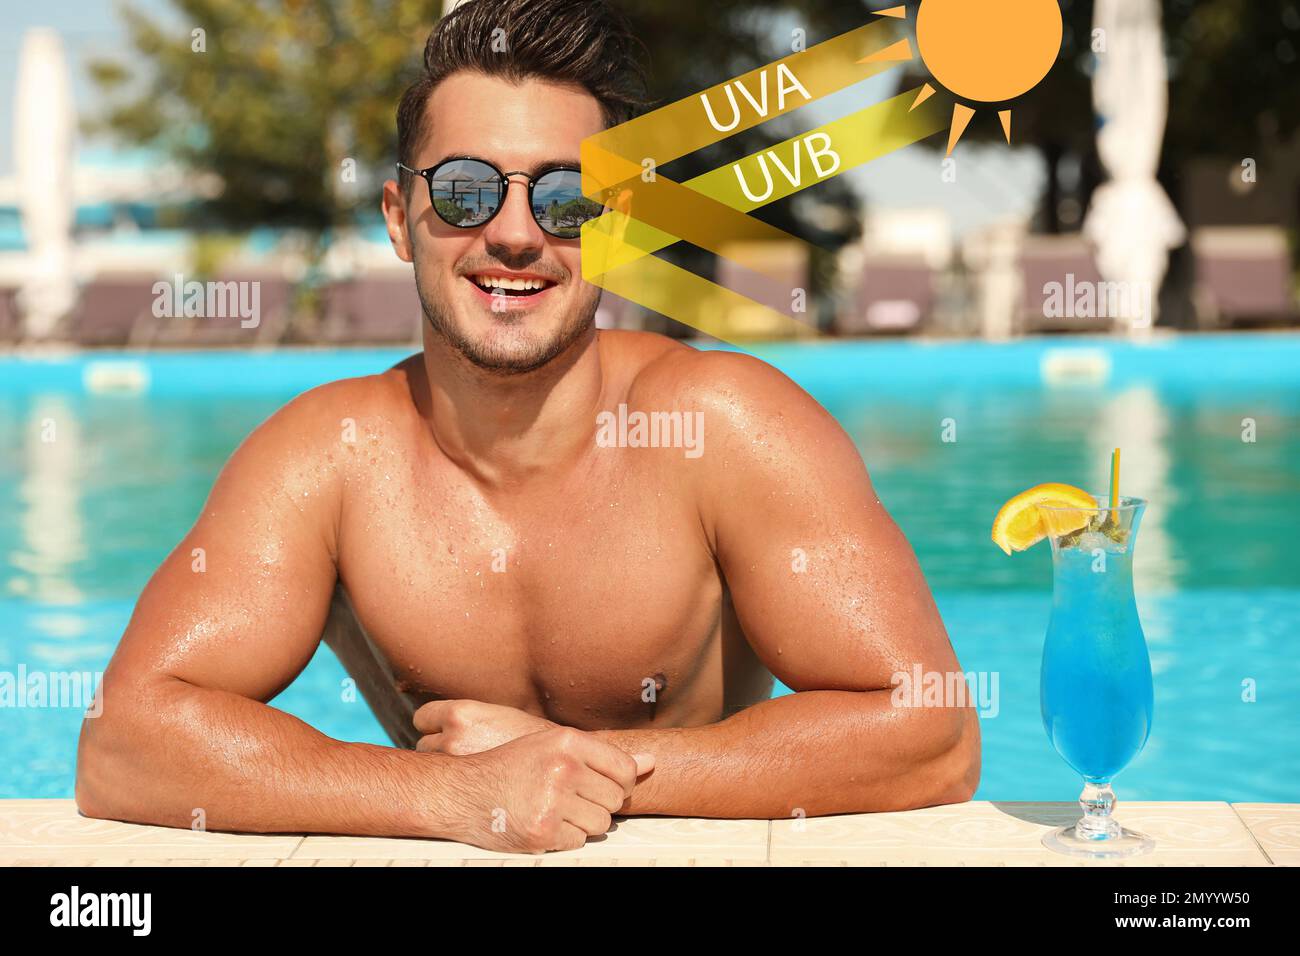 Man wearing sunglasses in outdoor swimming pool. UVA and UVB rays